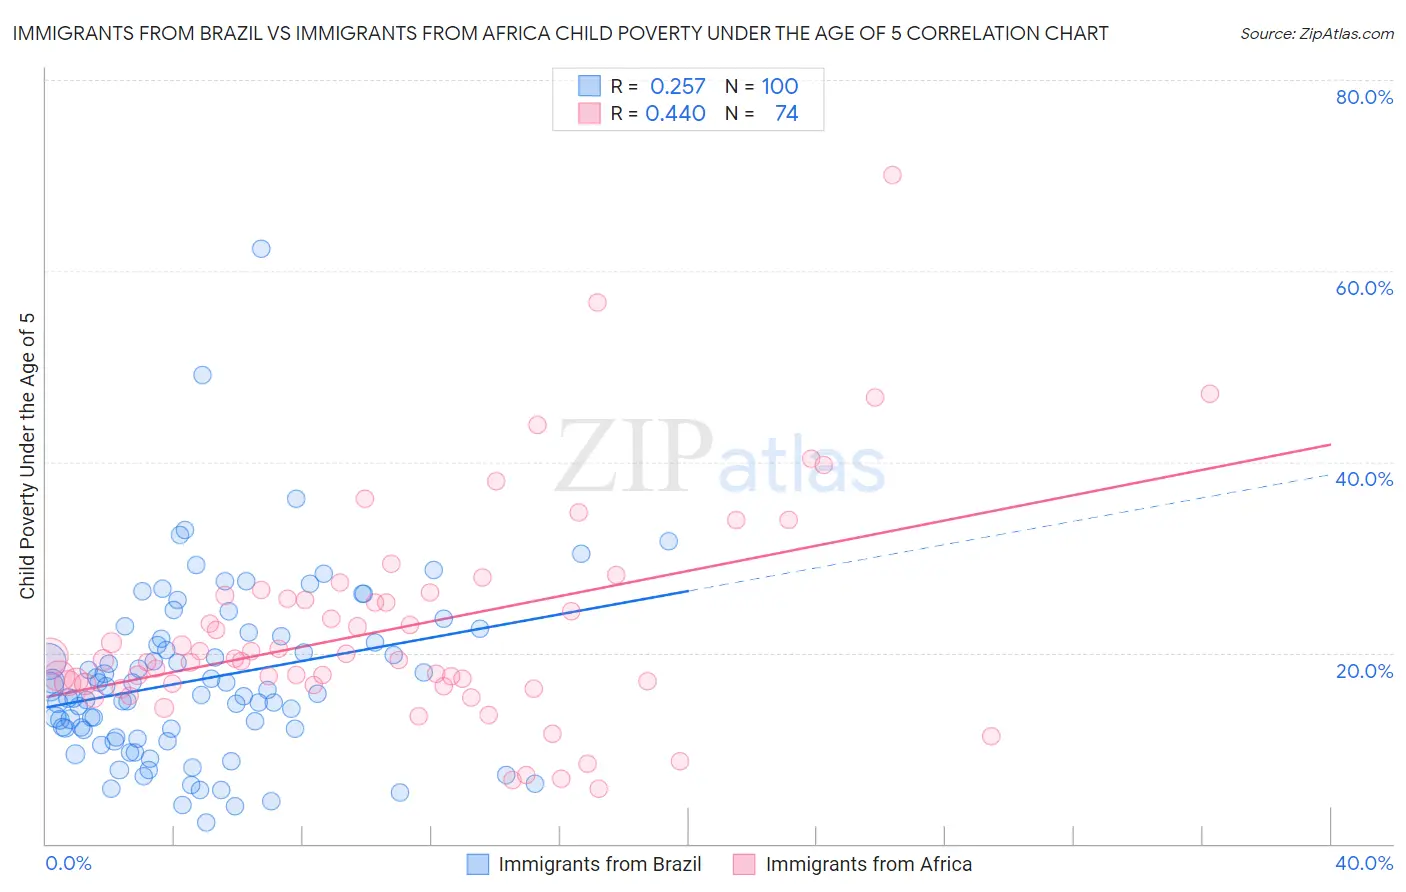 Immigrants from Brazil vs Immigrants from Africa Child Poverty Under the Age of 5